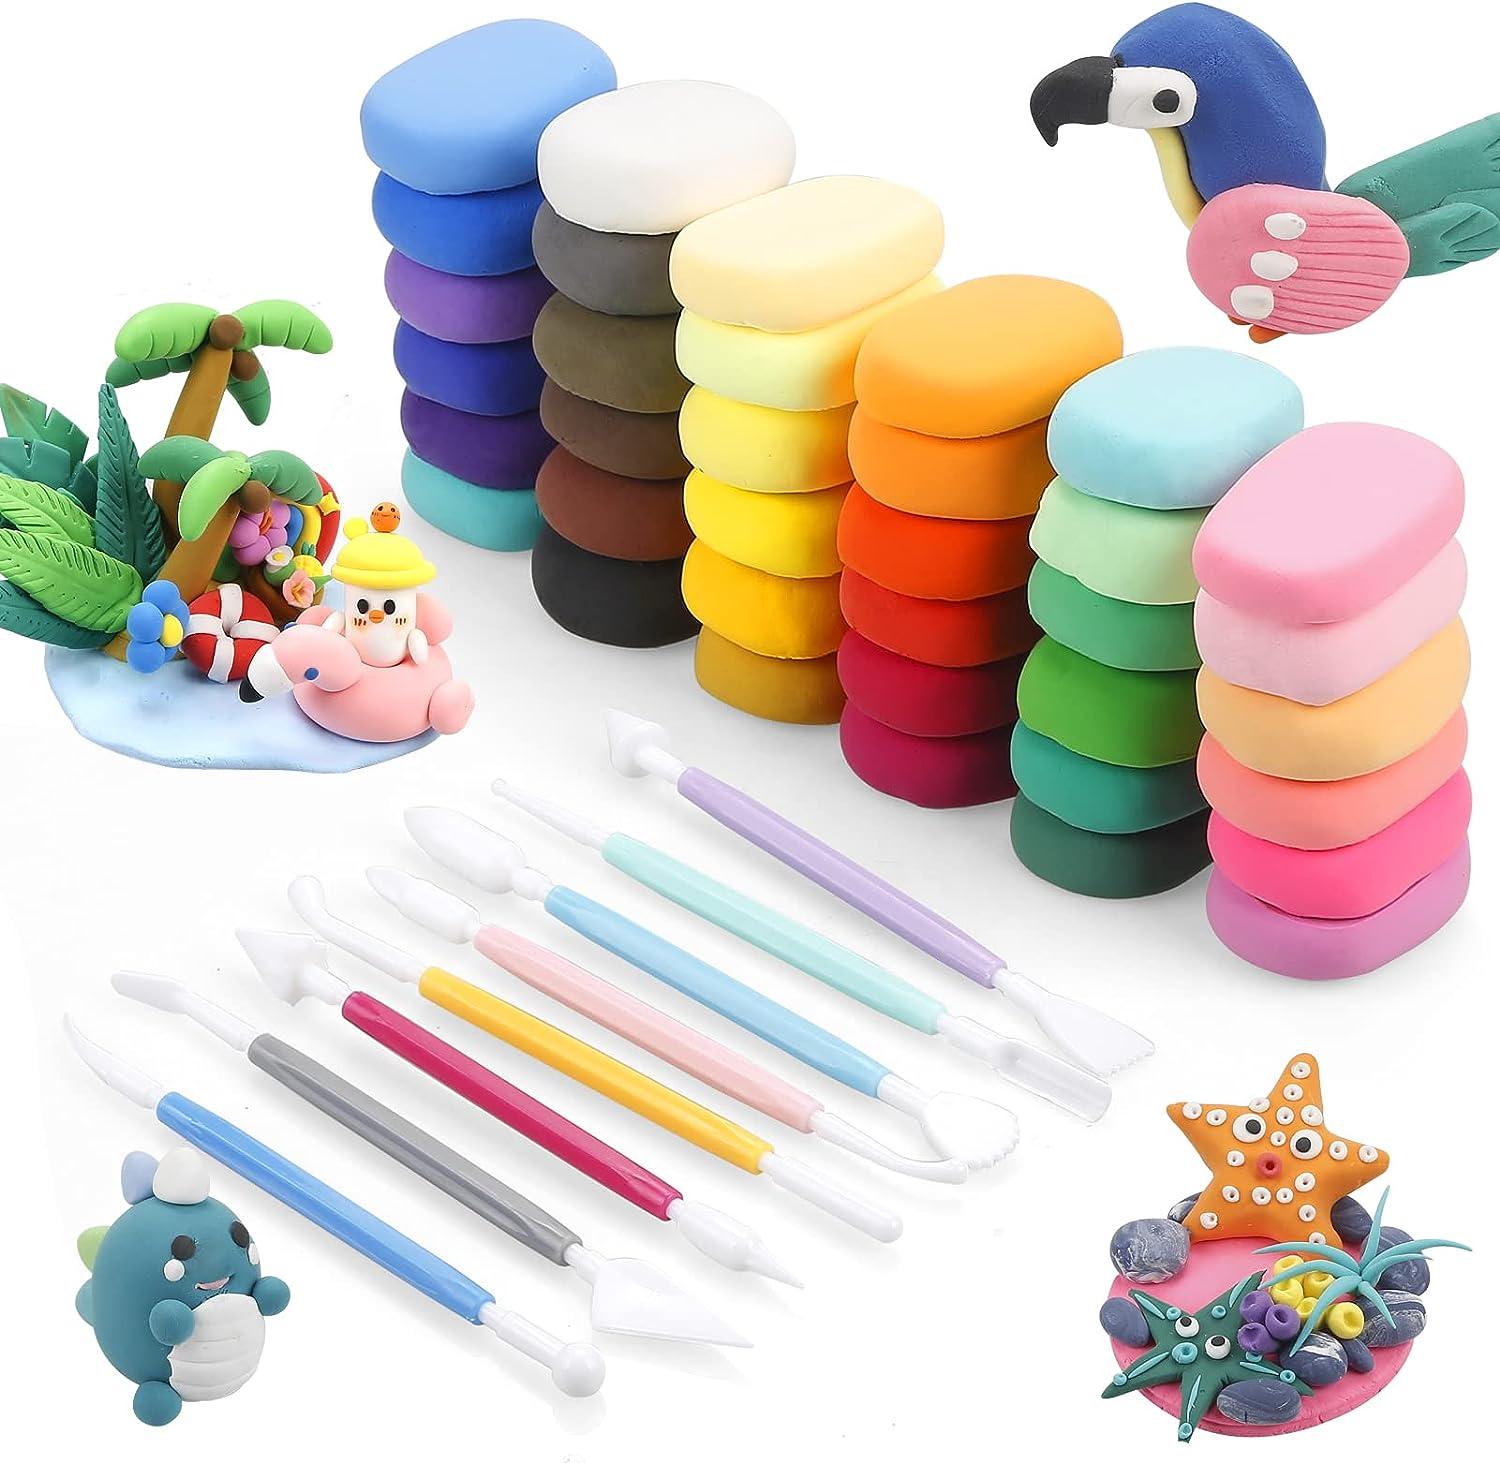 Air Dry Clay (36 Color Kit), Modeling Clay for Kids (Easy to Mold